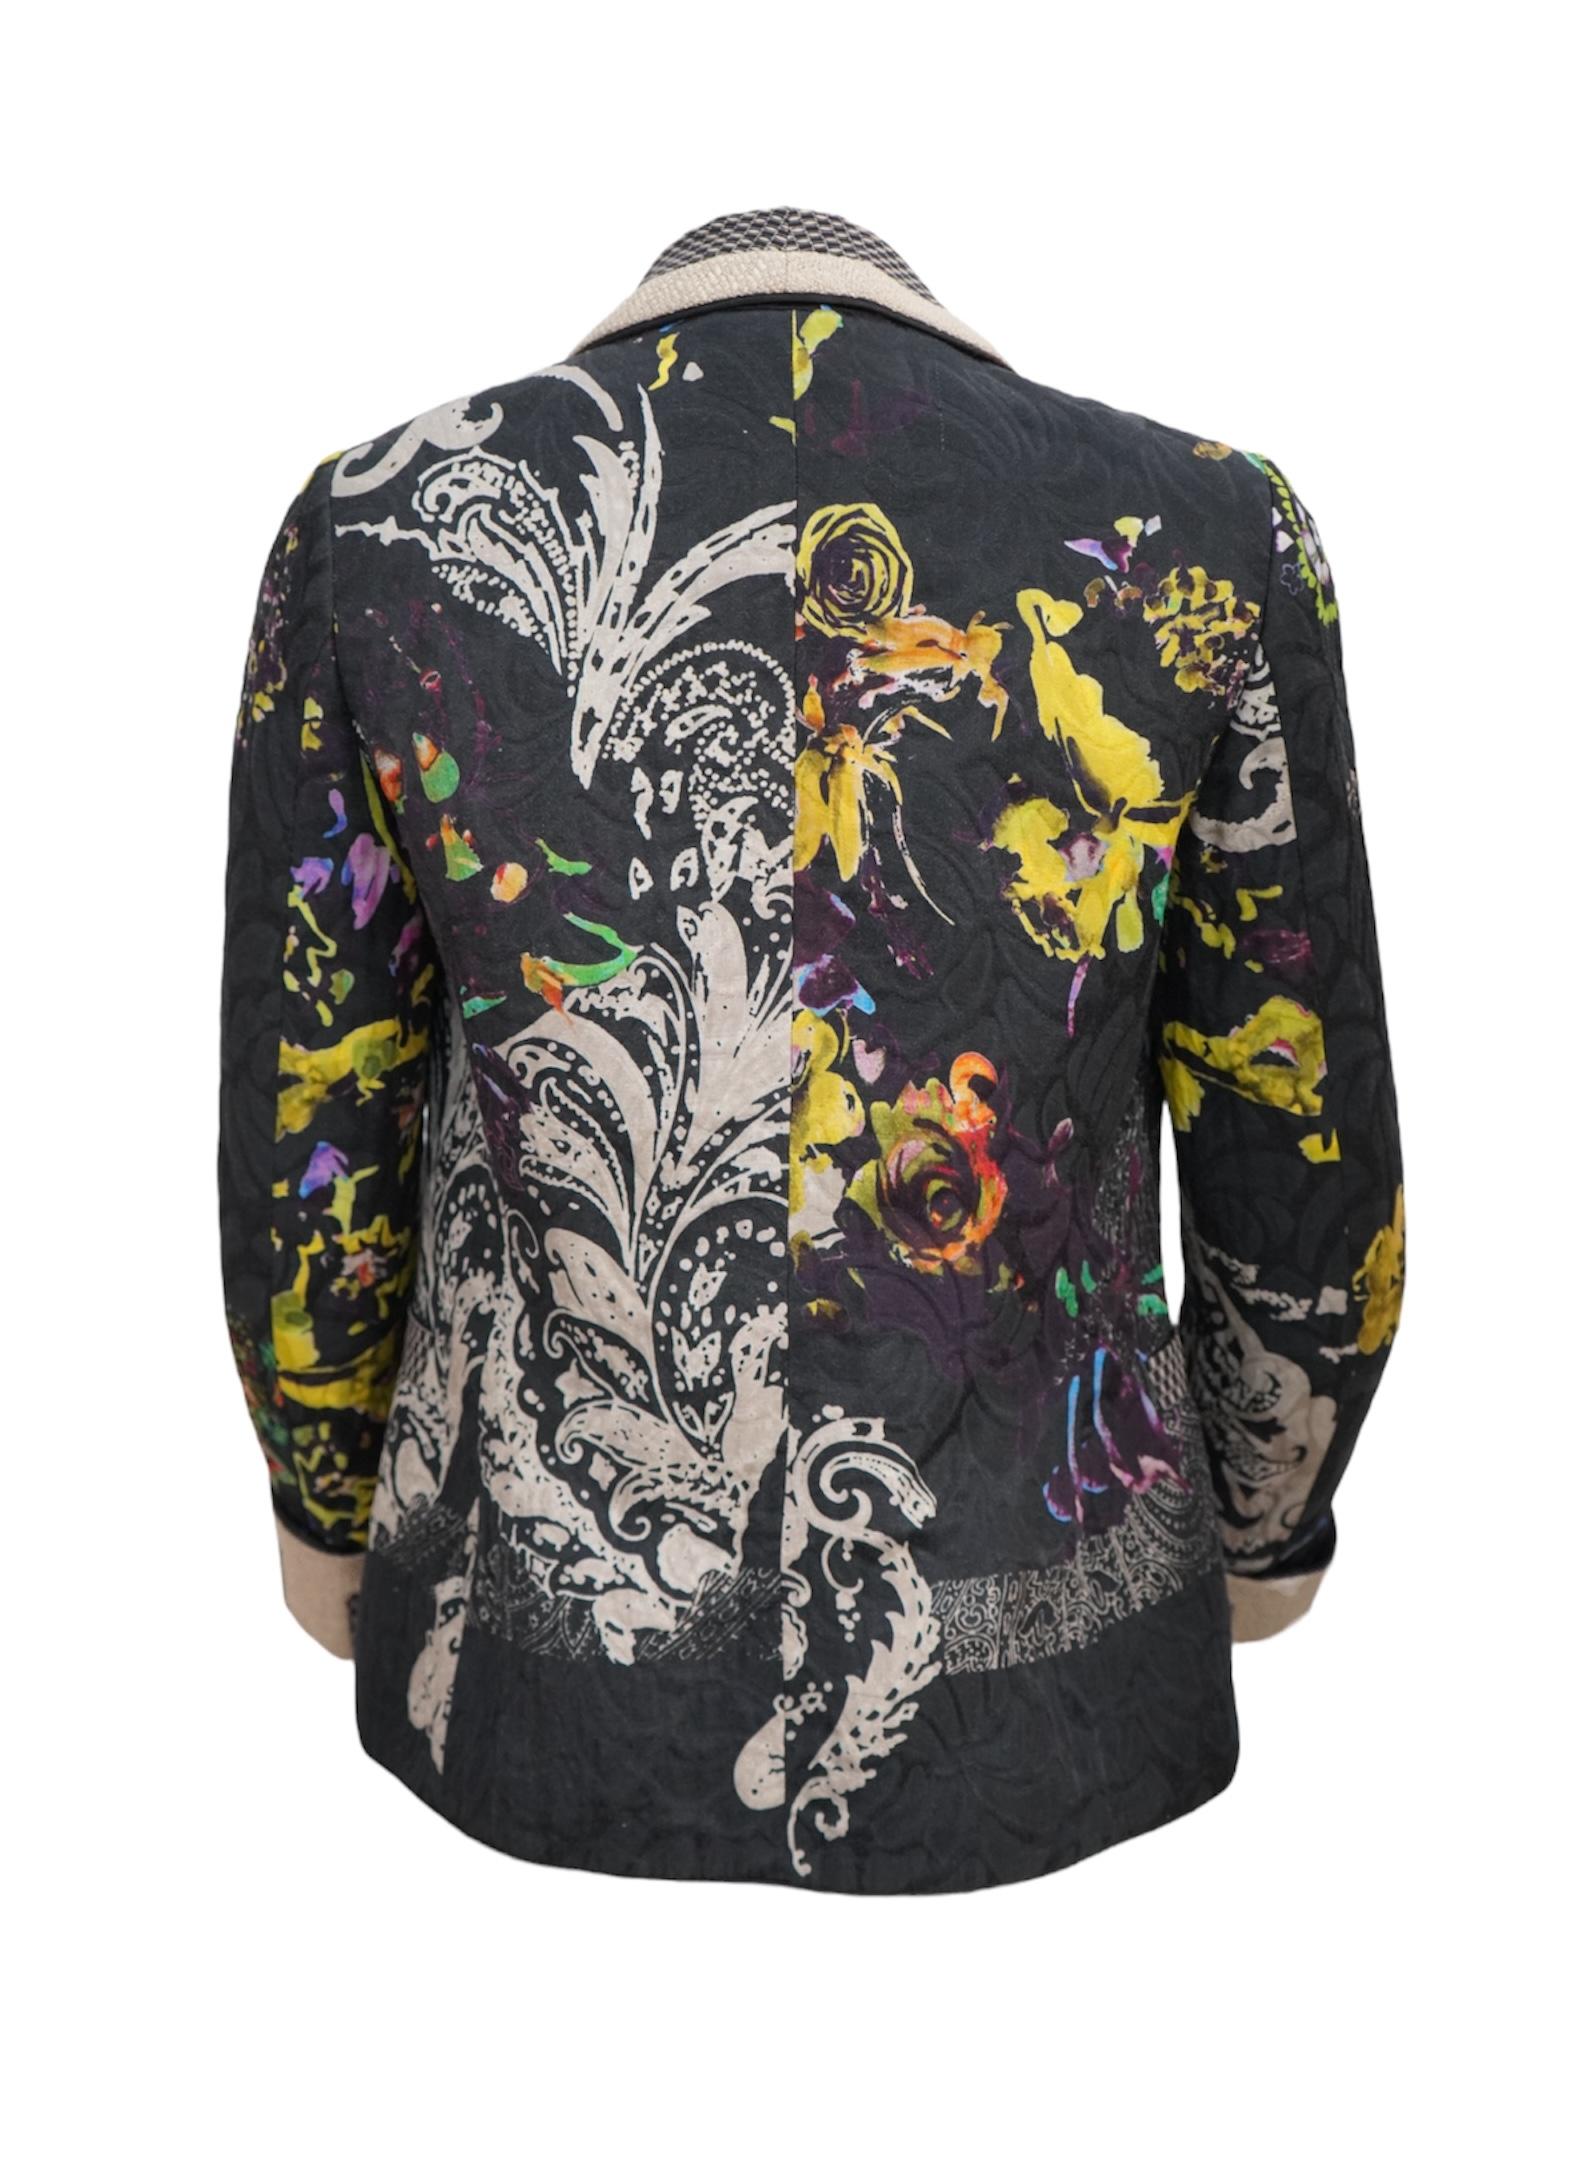 Etro Black Floral Paisley Blazer sz 40 In Excellent Condition For Sale In Beverly Hills, CA